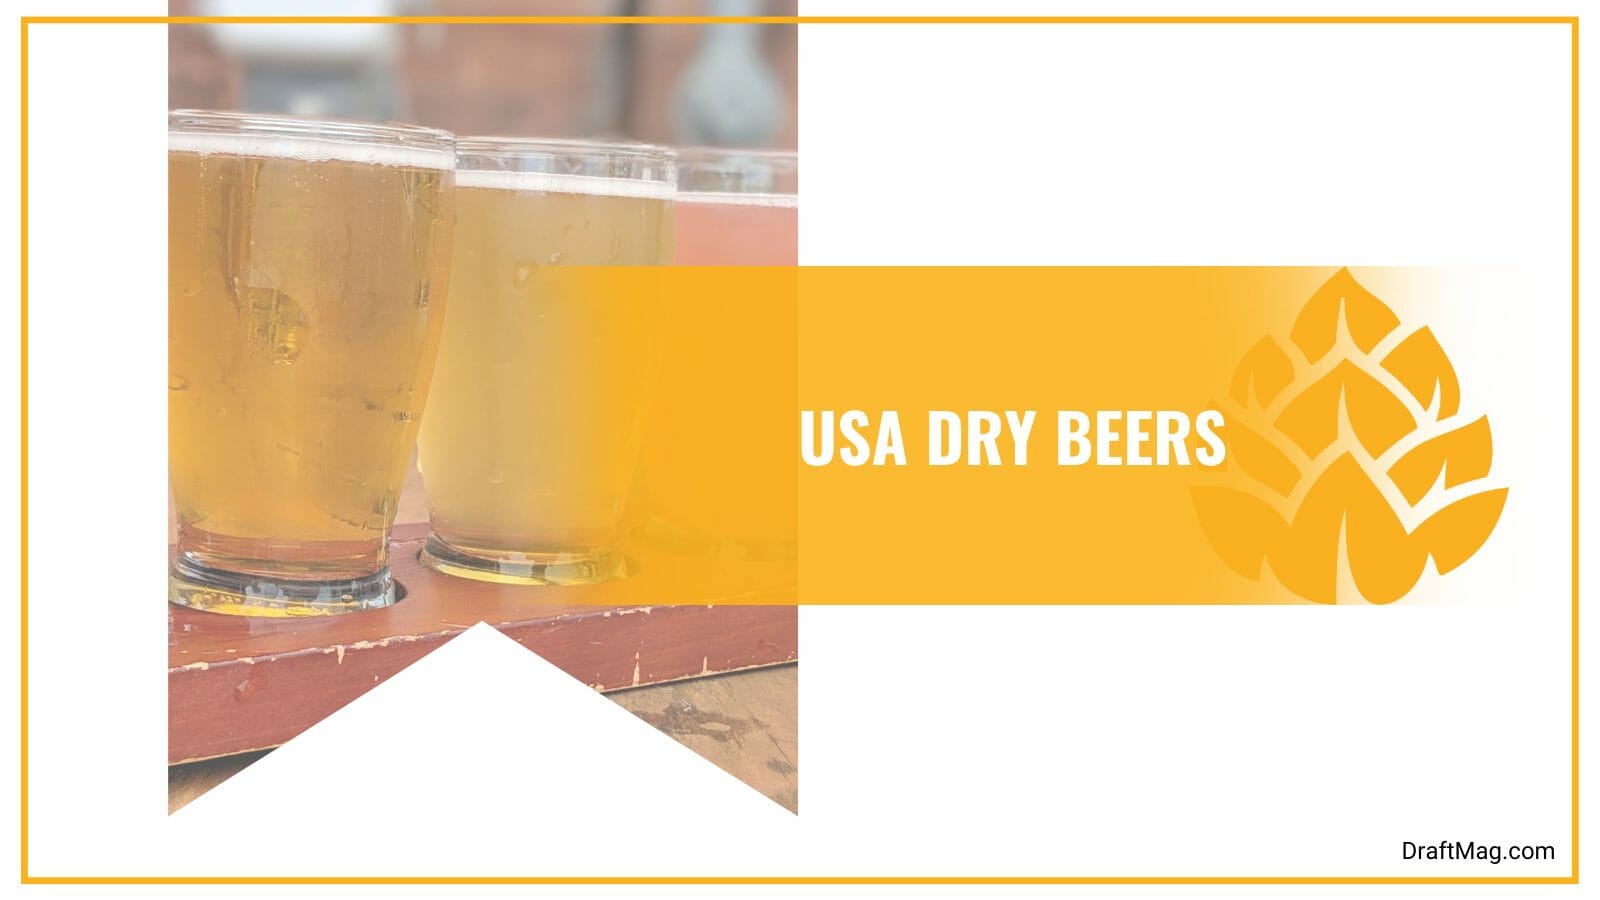 Dry beers in usa